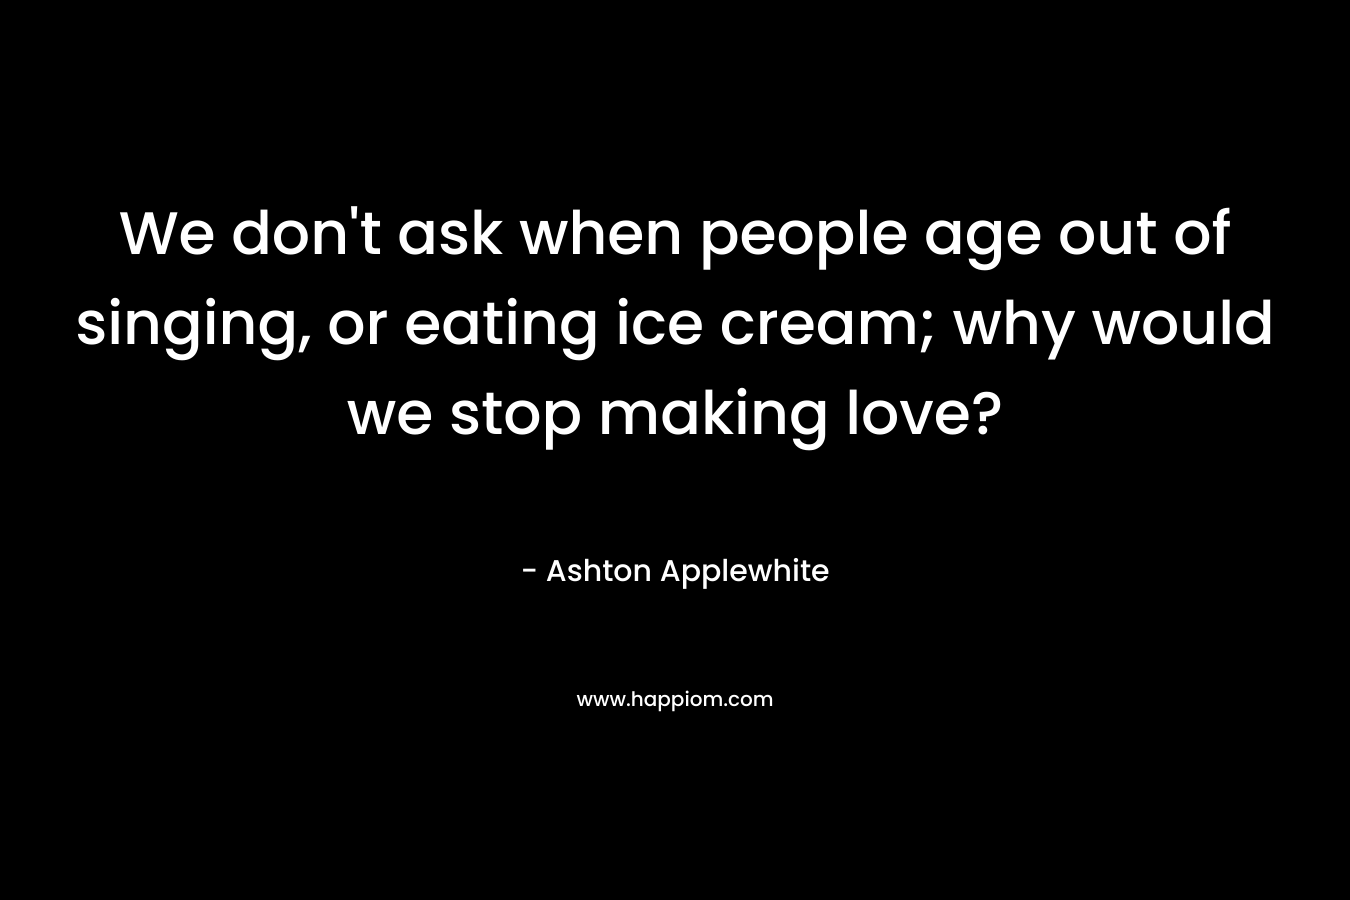 We don’t ask when people age out of singing, or eating ice cream; why would we stop making love? – Ashton Applewhite